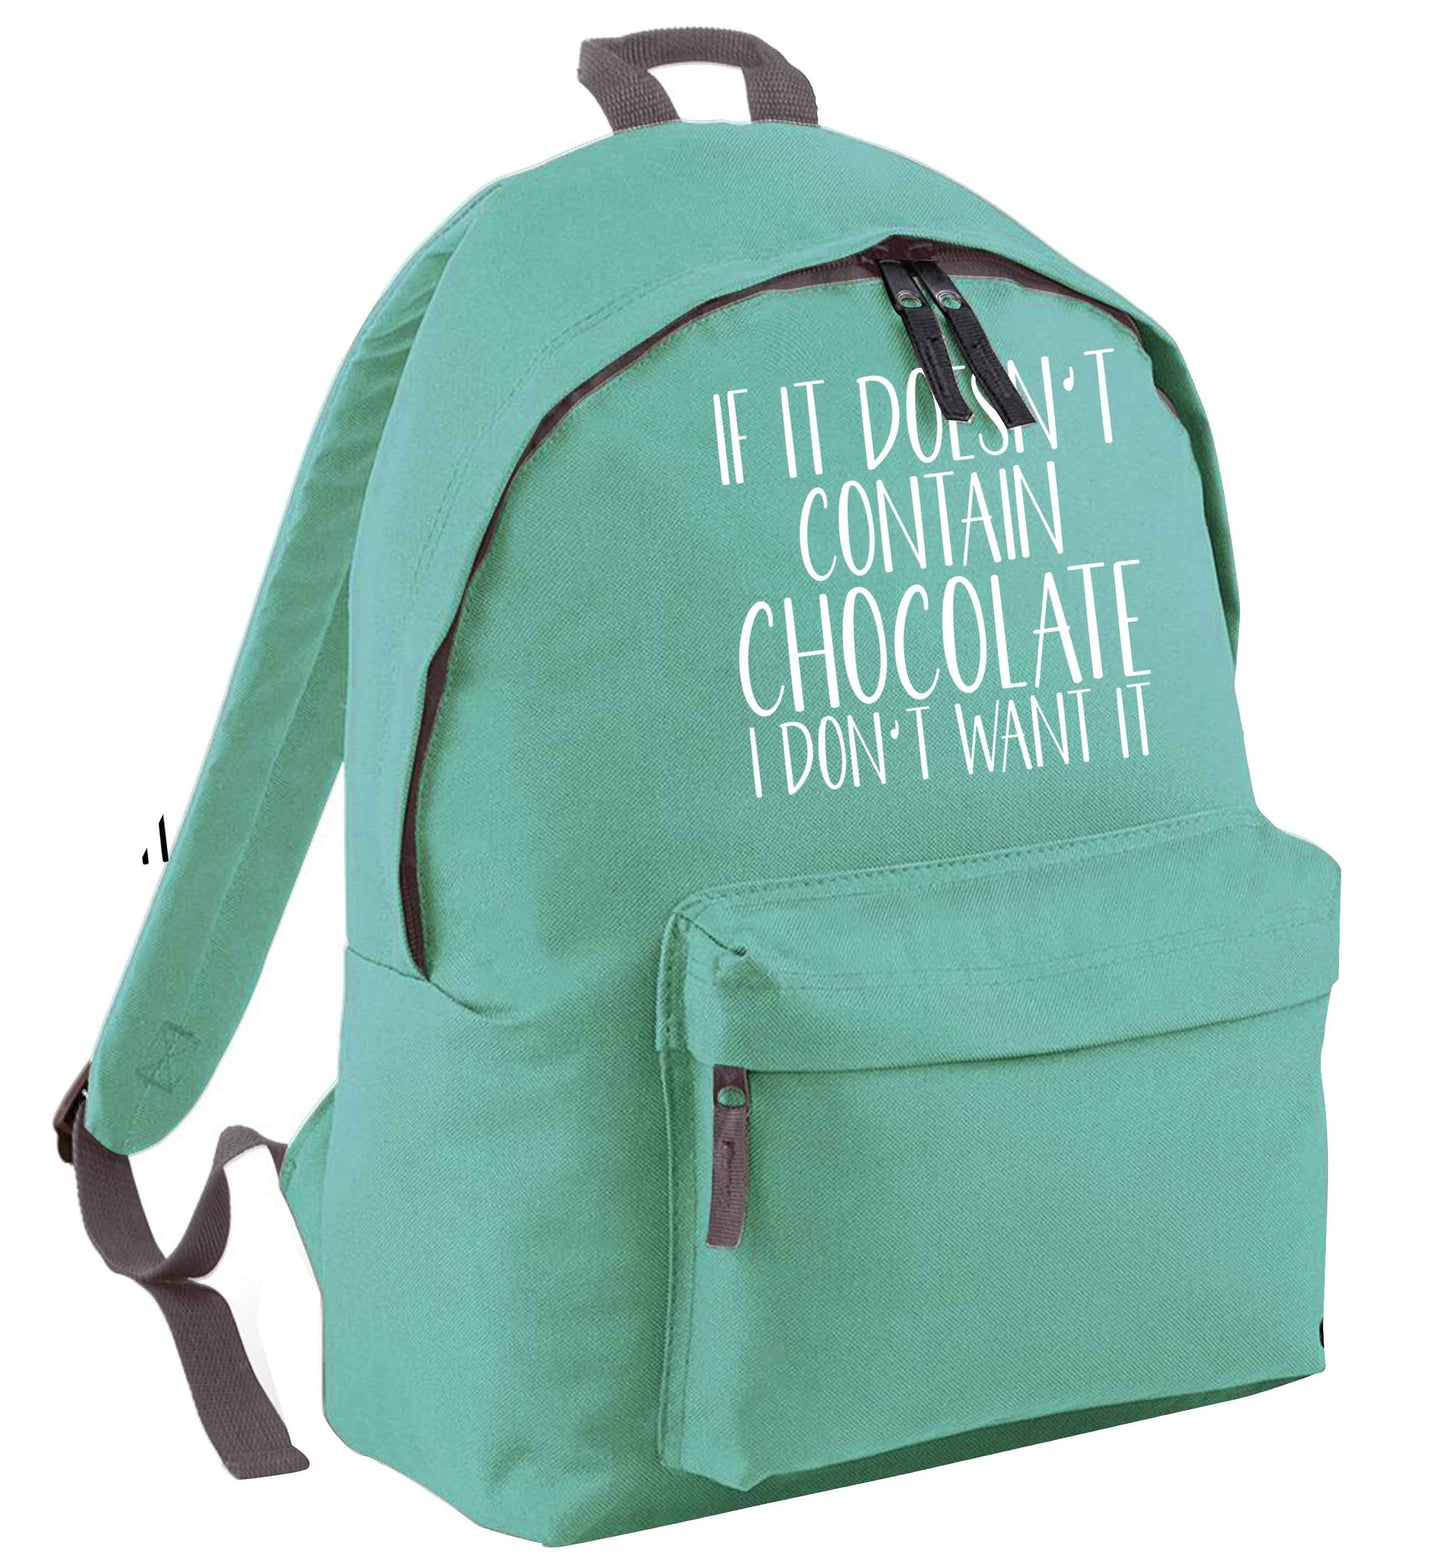 If it doesn't contain chocolate I don't want it mint adults backpack